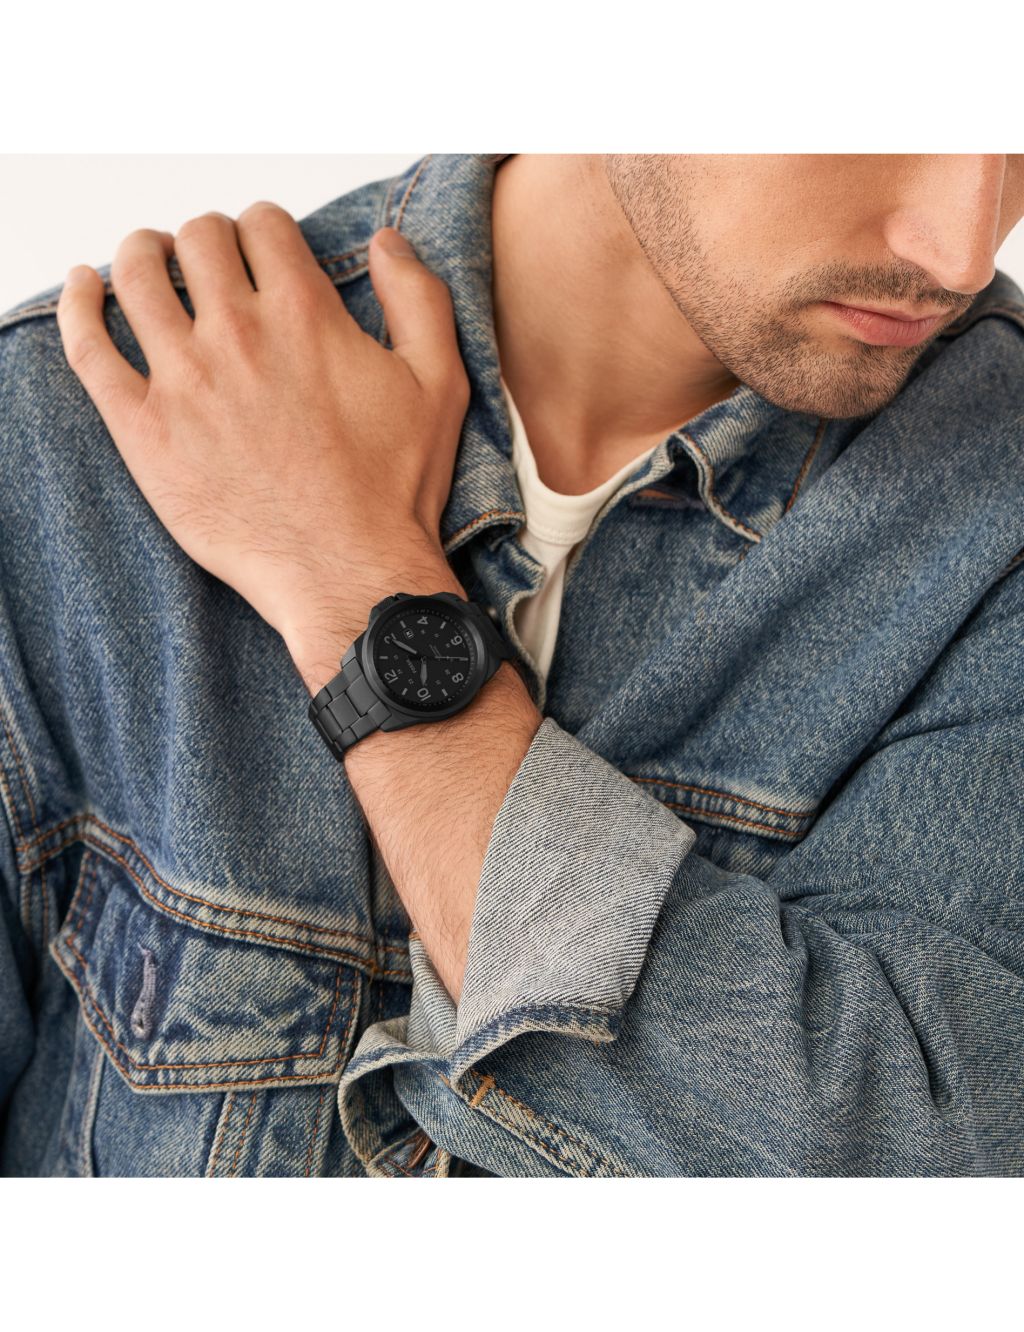 Fossil Bronson Black Stainless Steel Watch image 3